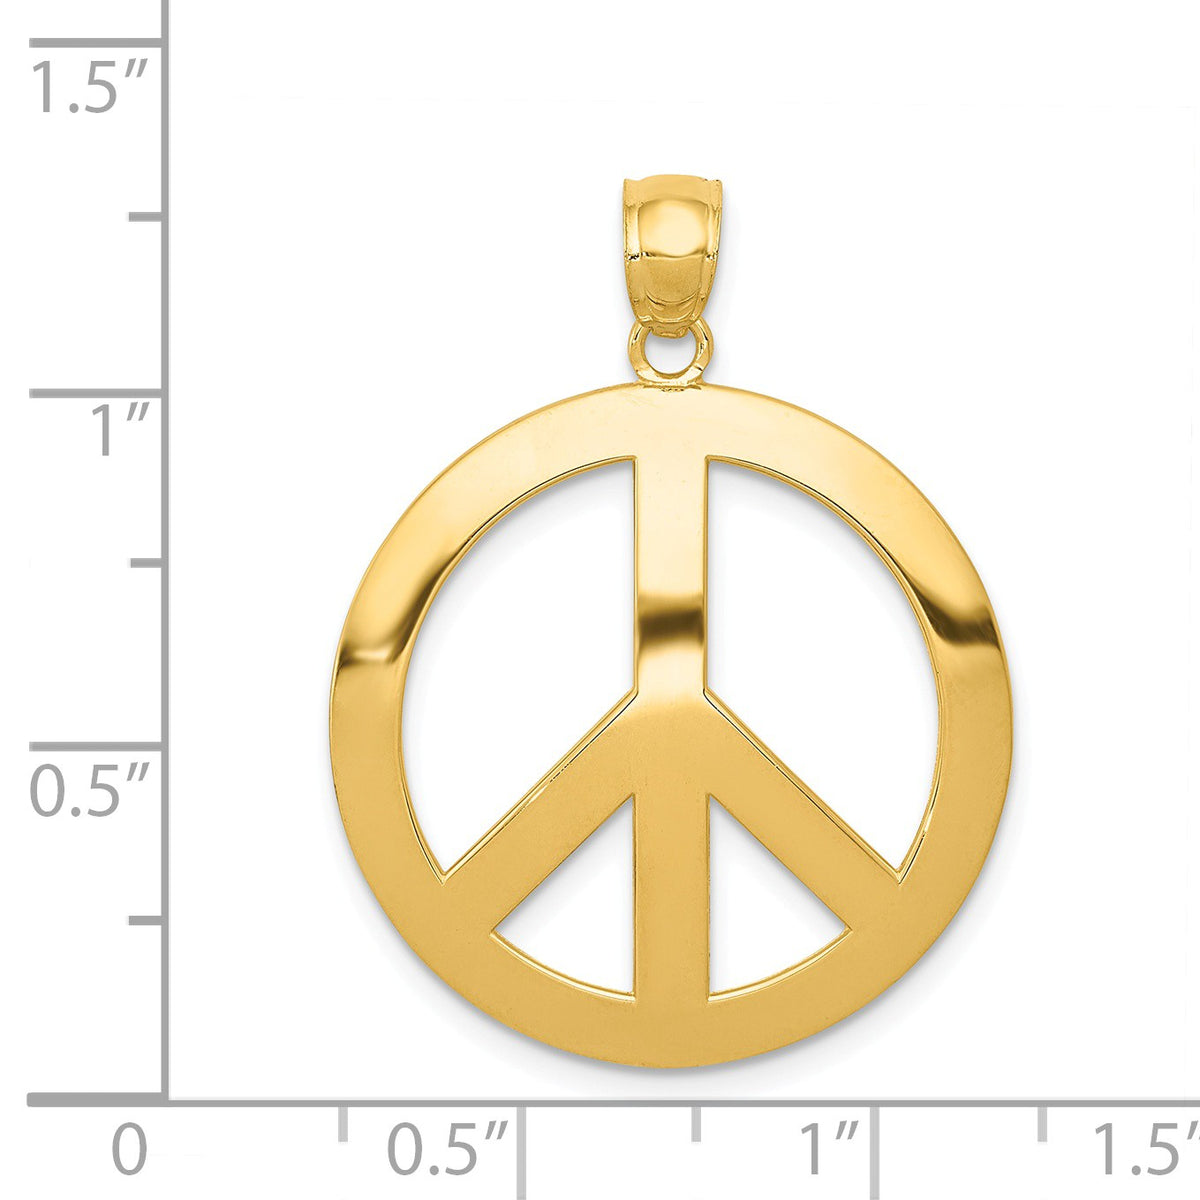 Alternate view of the 14k Yellow Gold 24mm Polished Convex Peace Symbol Pendant by The Black Bow Jewelry Co.